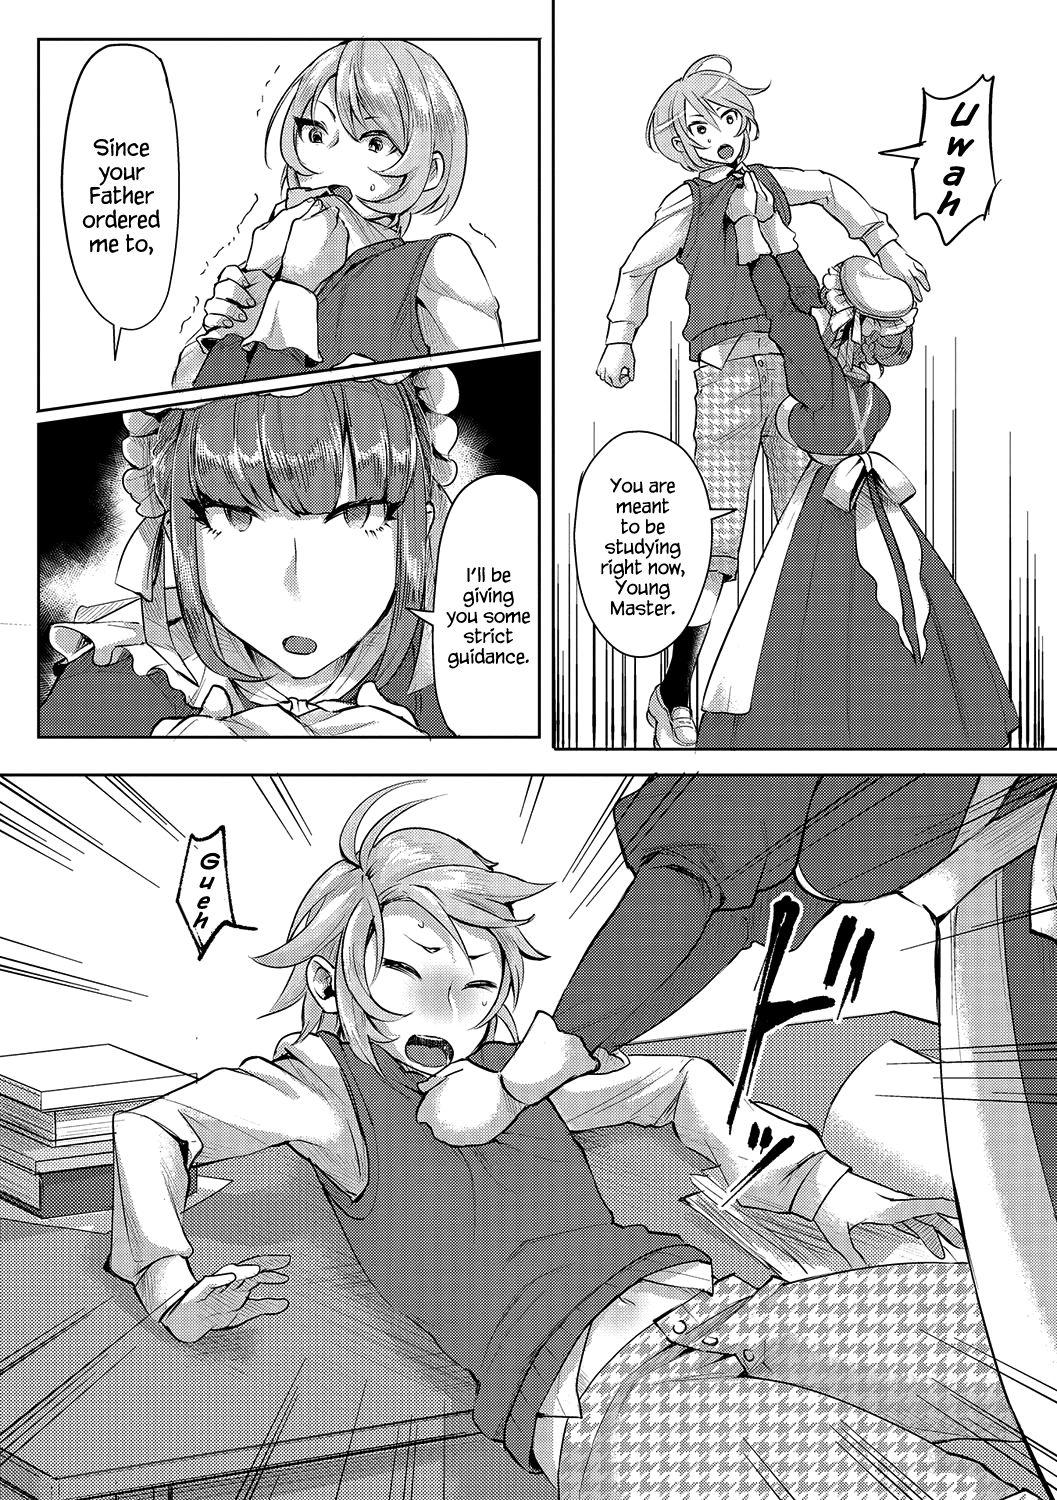 Small Bocchama no Aibou Maid | The Young Master’s Partner Maid Face - Page 4